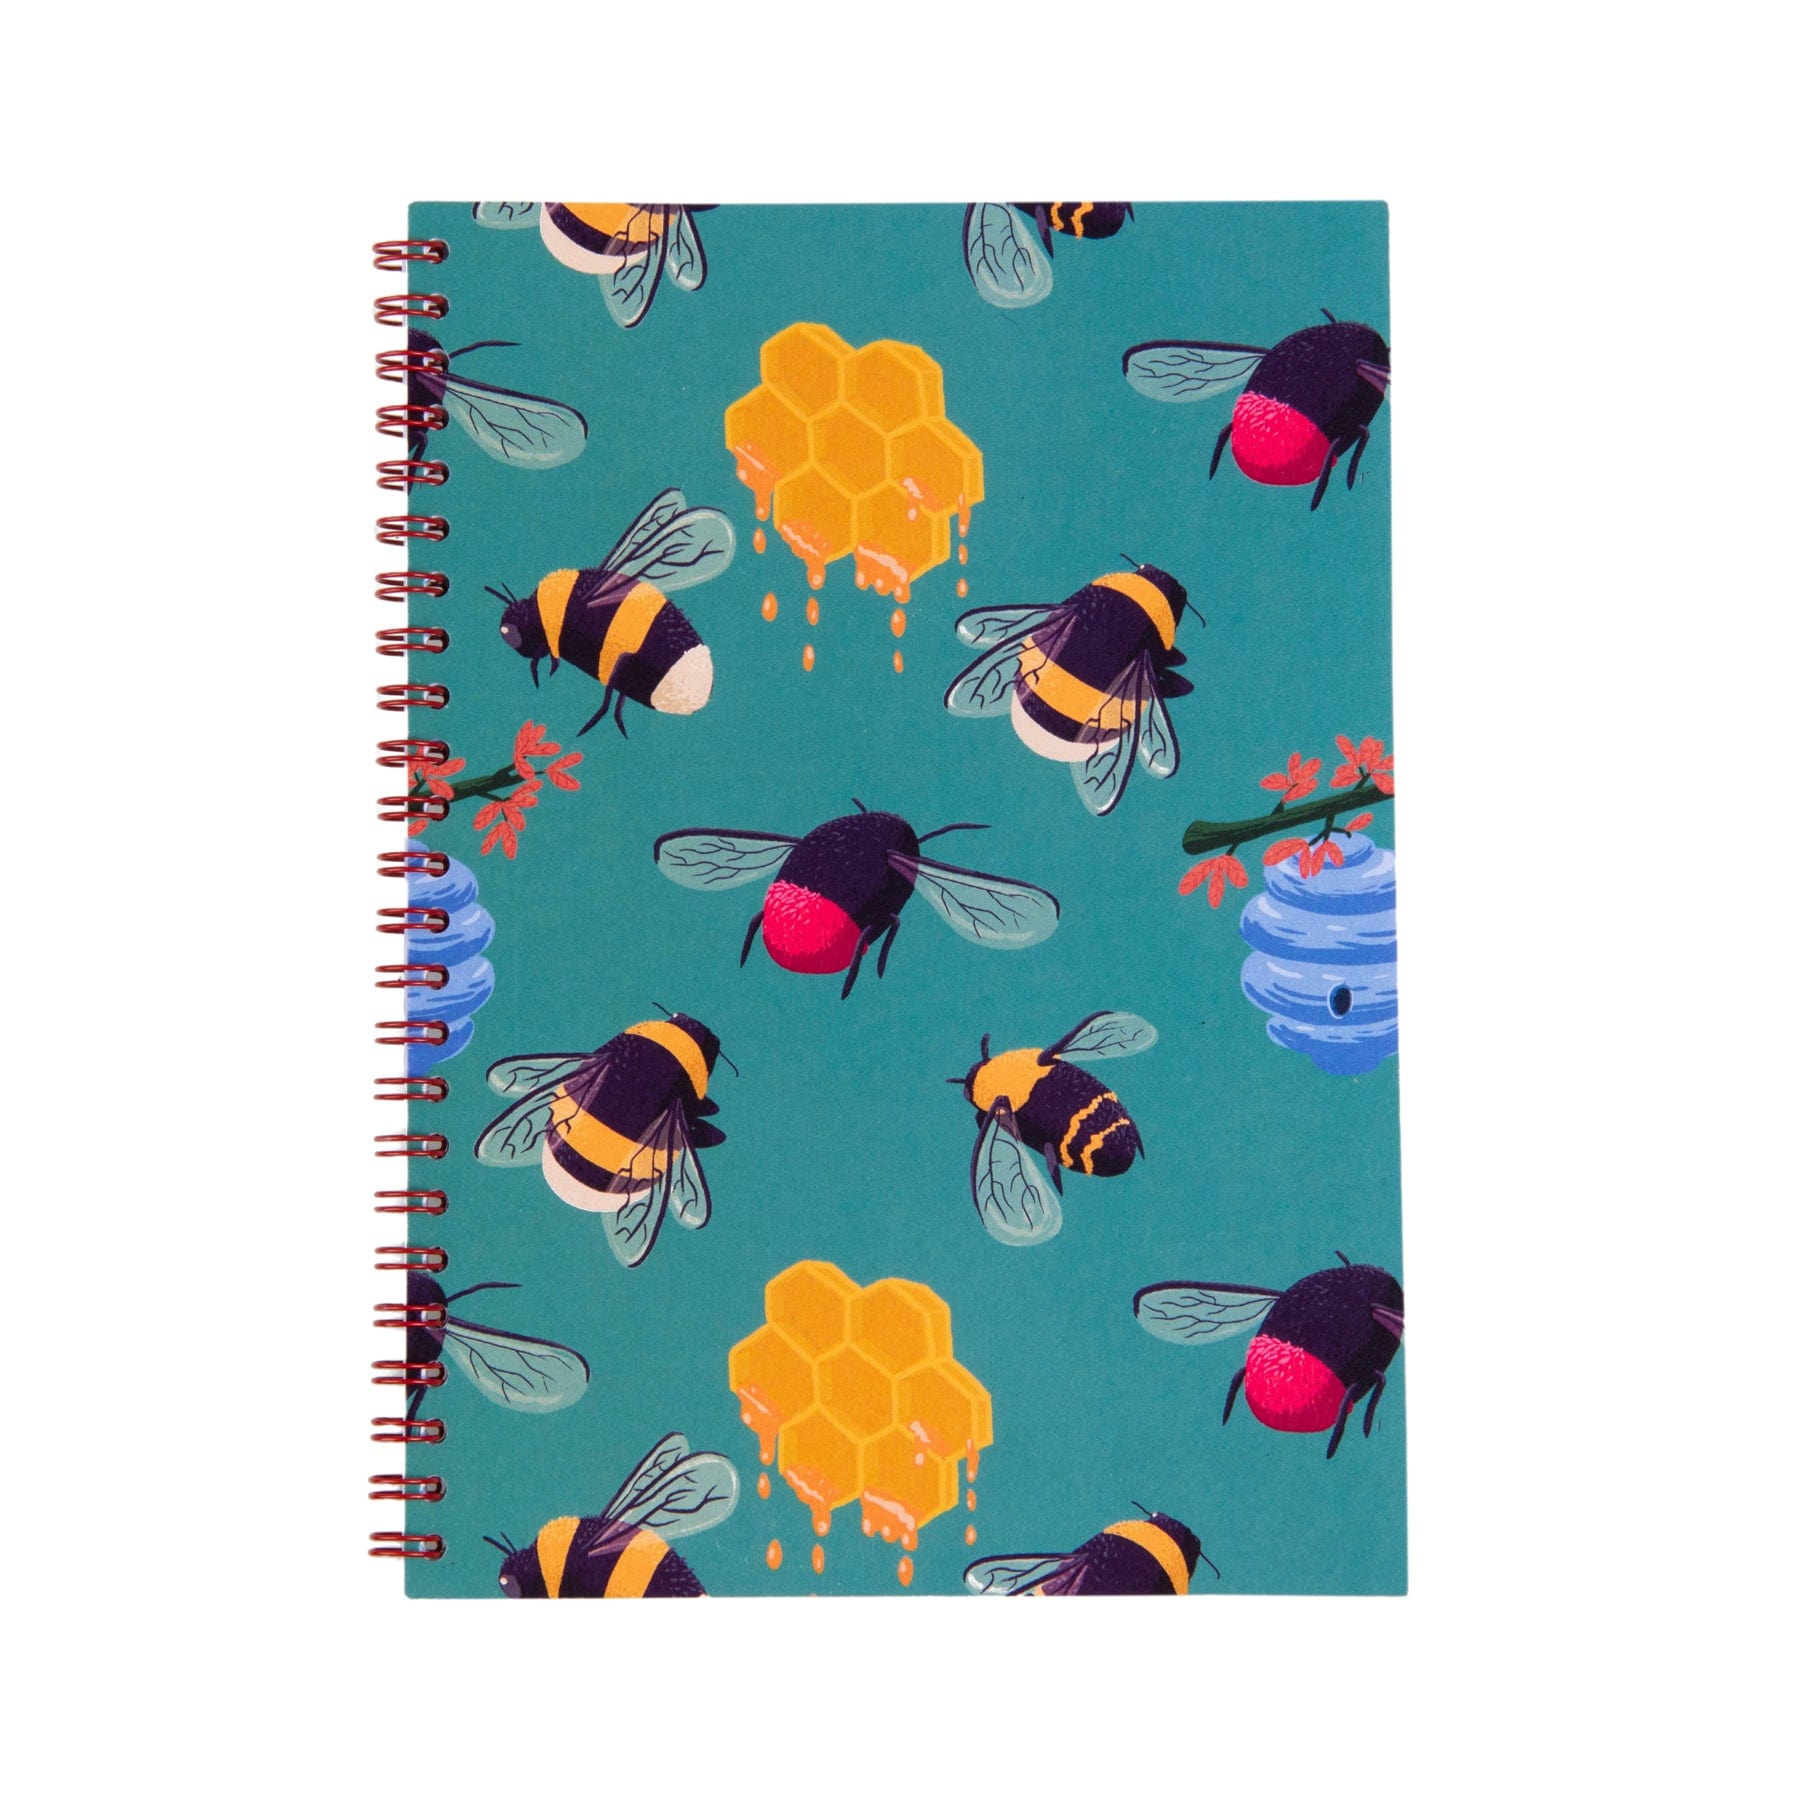 Spiral notebook with bee and honeycomb pattern on teal background, stationery, bumblebees, flowers, nature-themed design